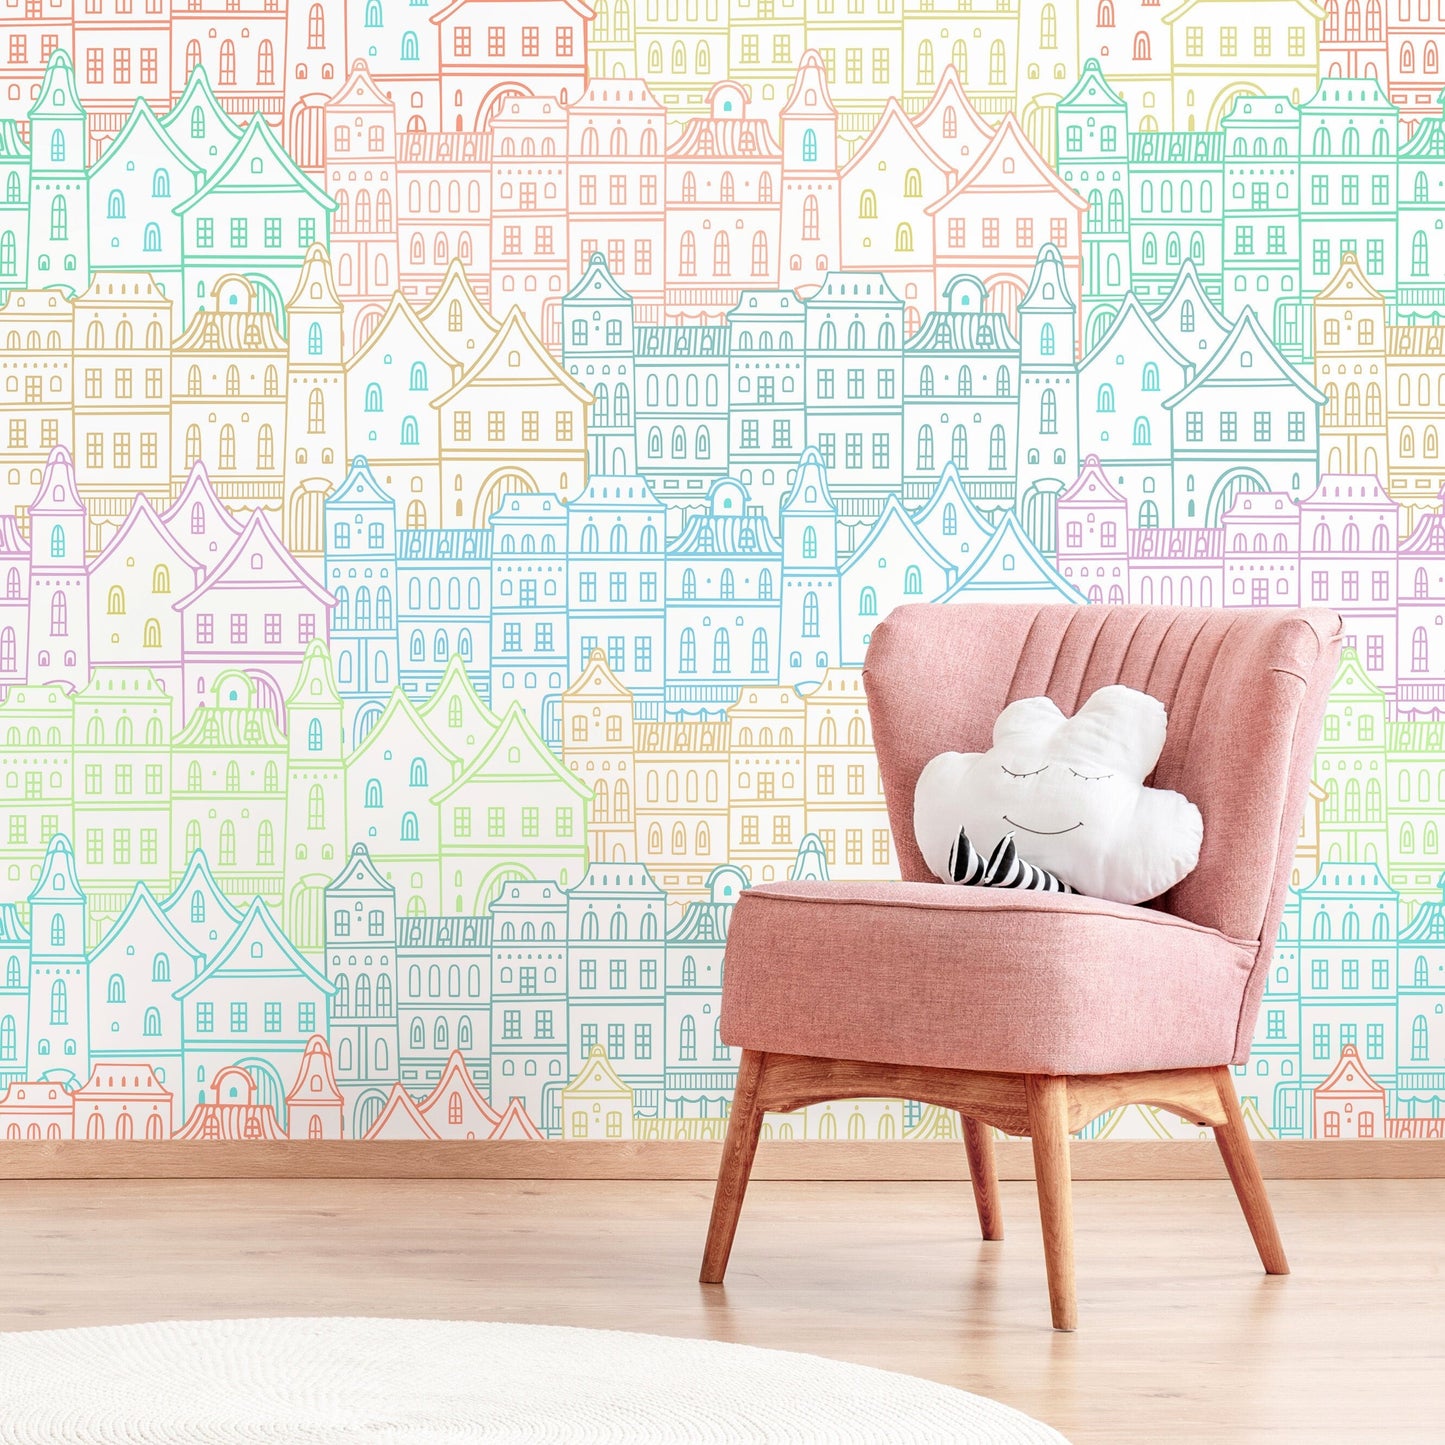 Wallpaper Peel and Stick Wallpaper Removable Wallpaper Home Decor Wall Art Wall Decor Room Decor / Colorful City Wallpaper - A743